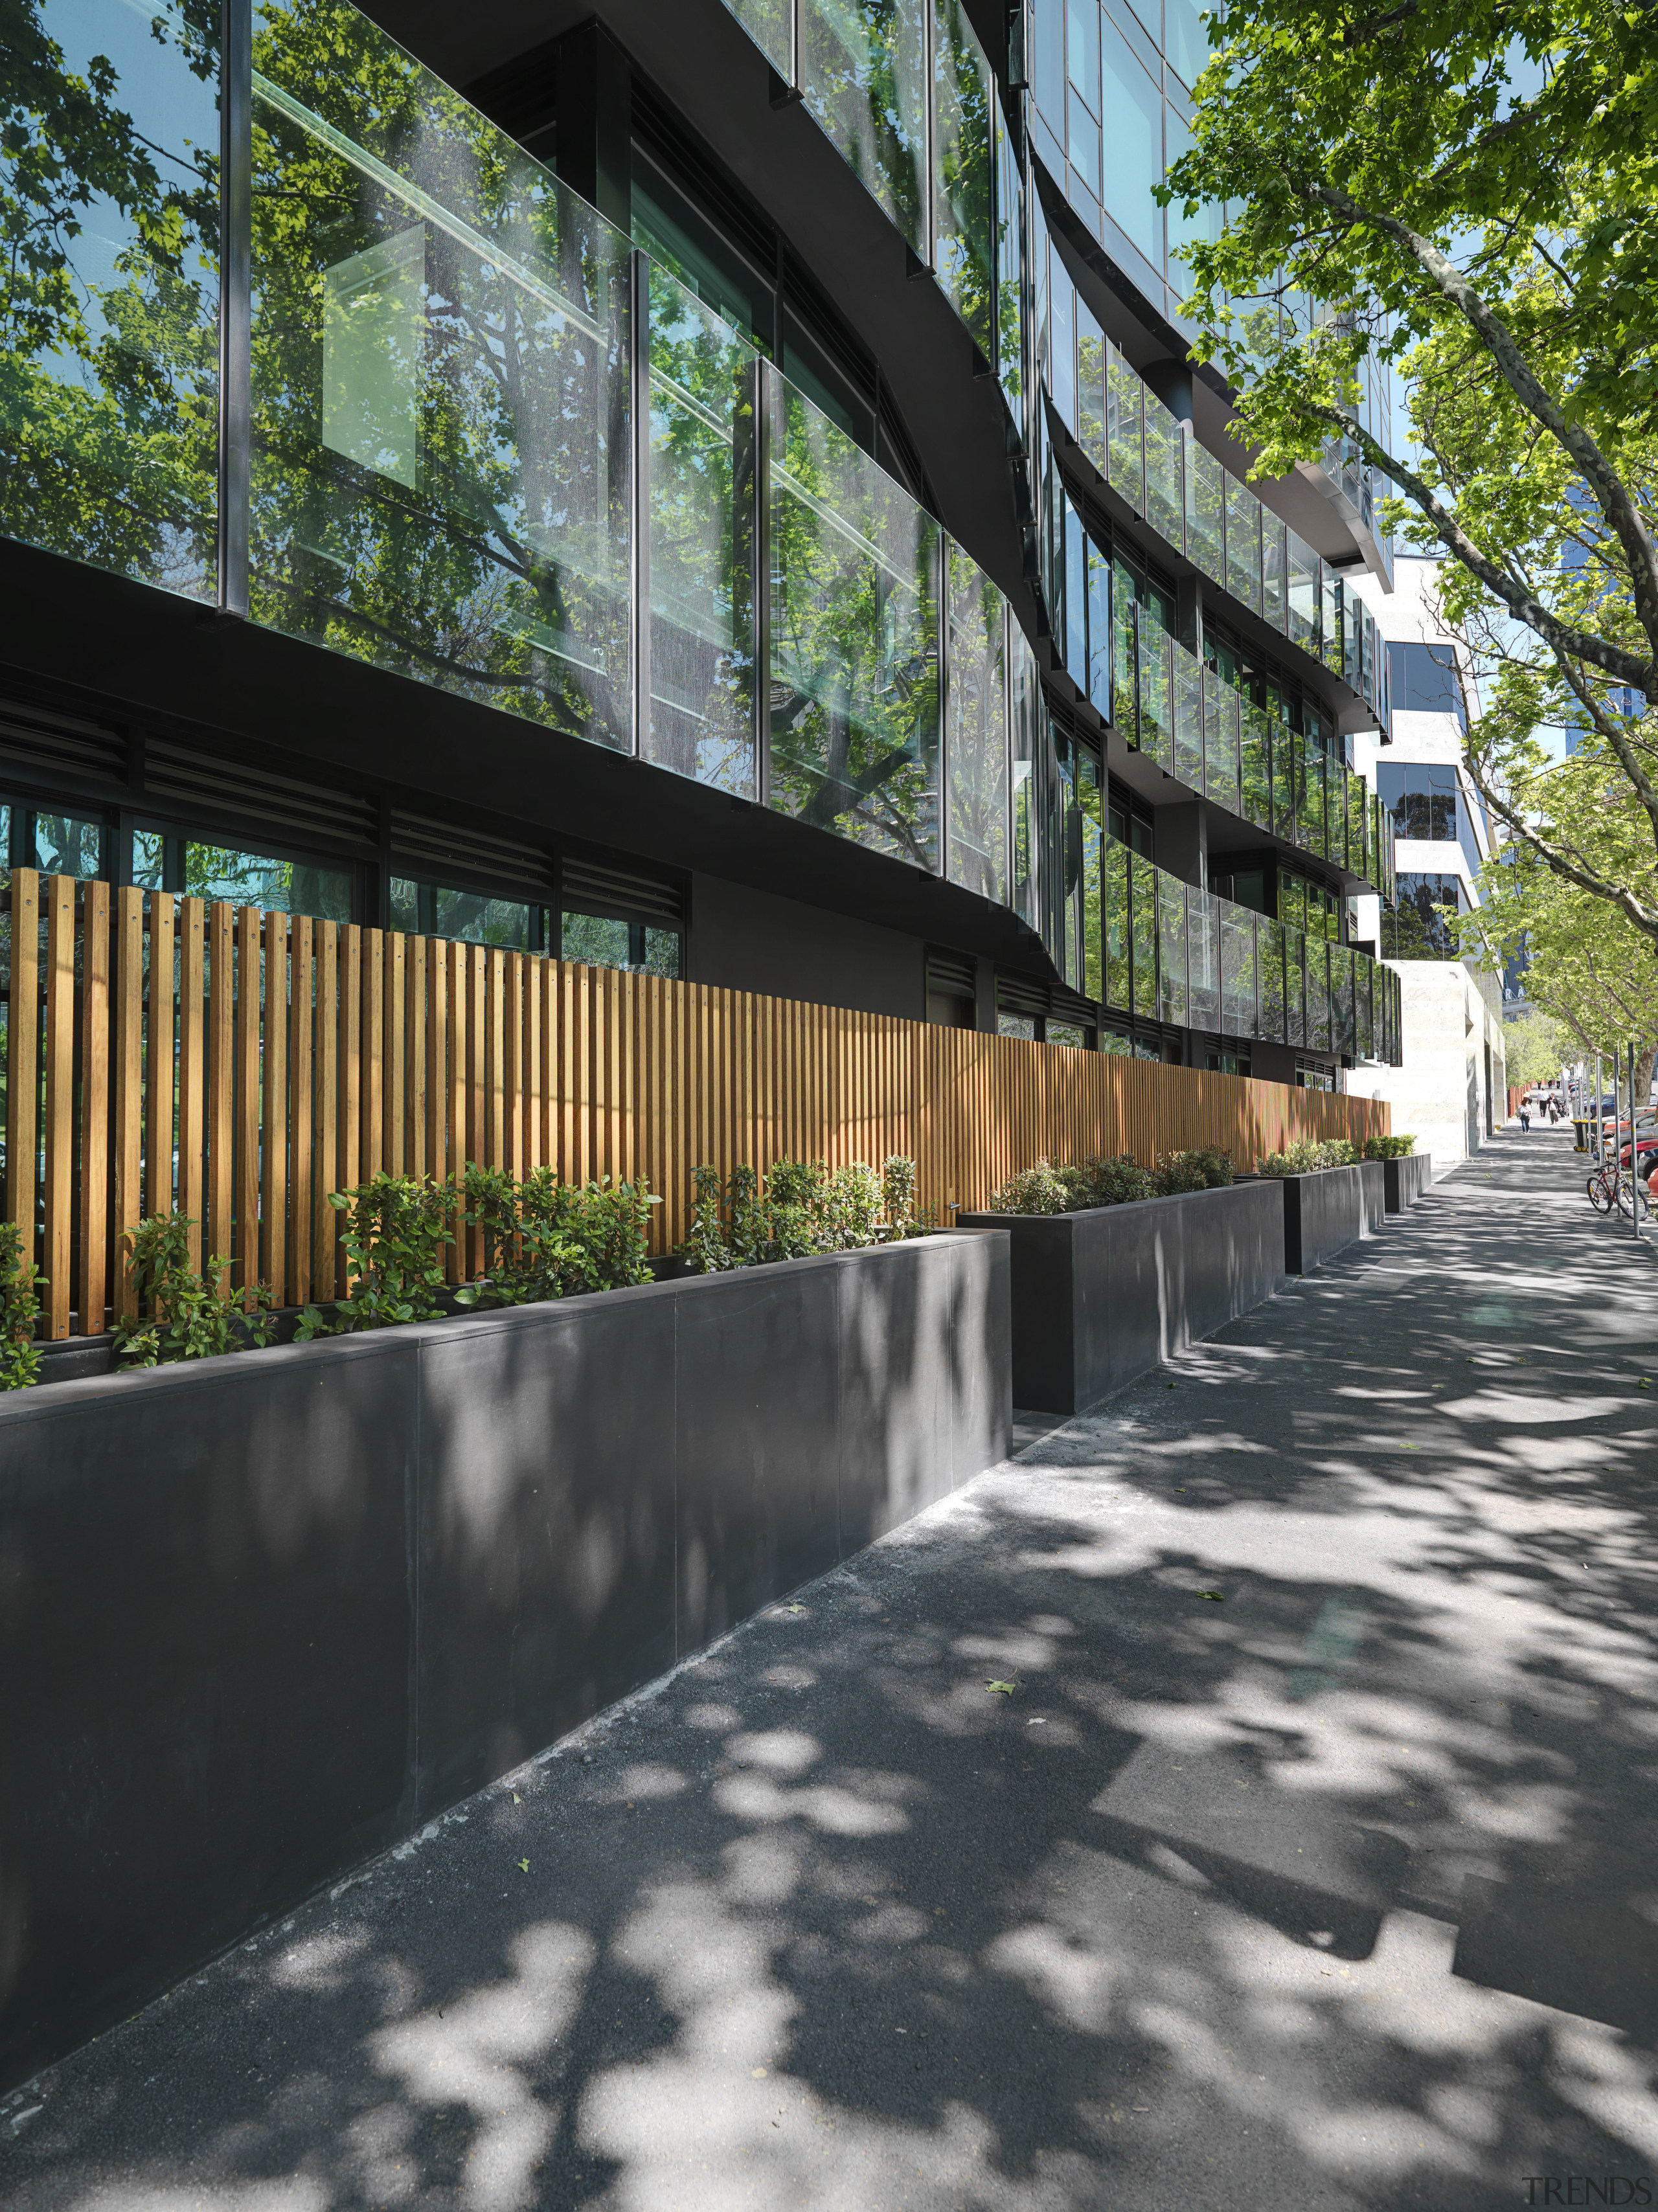 Exterior view of One East Melbourne developed by architecture, building, condominium, facade, house, mixed use, neighbourhood, outdoor structure, real estate, reflection, residential area, tree, urban design, walkway, black